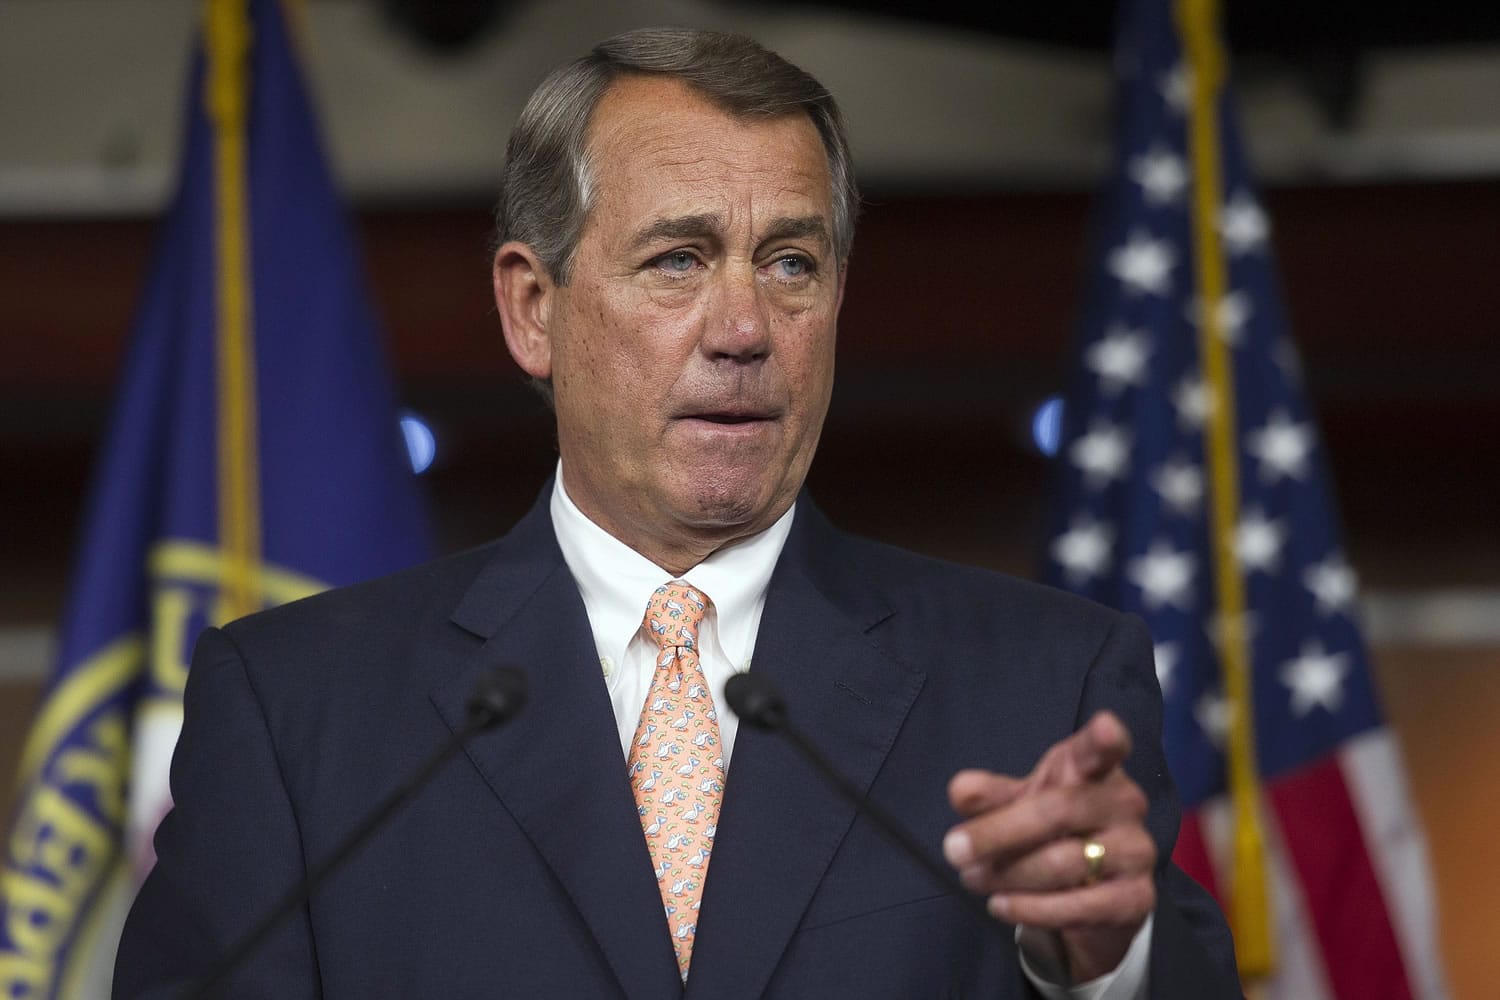 House Speaker John Boehner of Ohio speaks during a news conference on Capitol Hill in Washington.